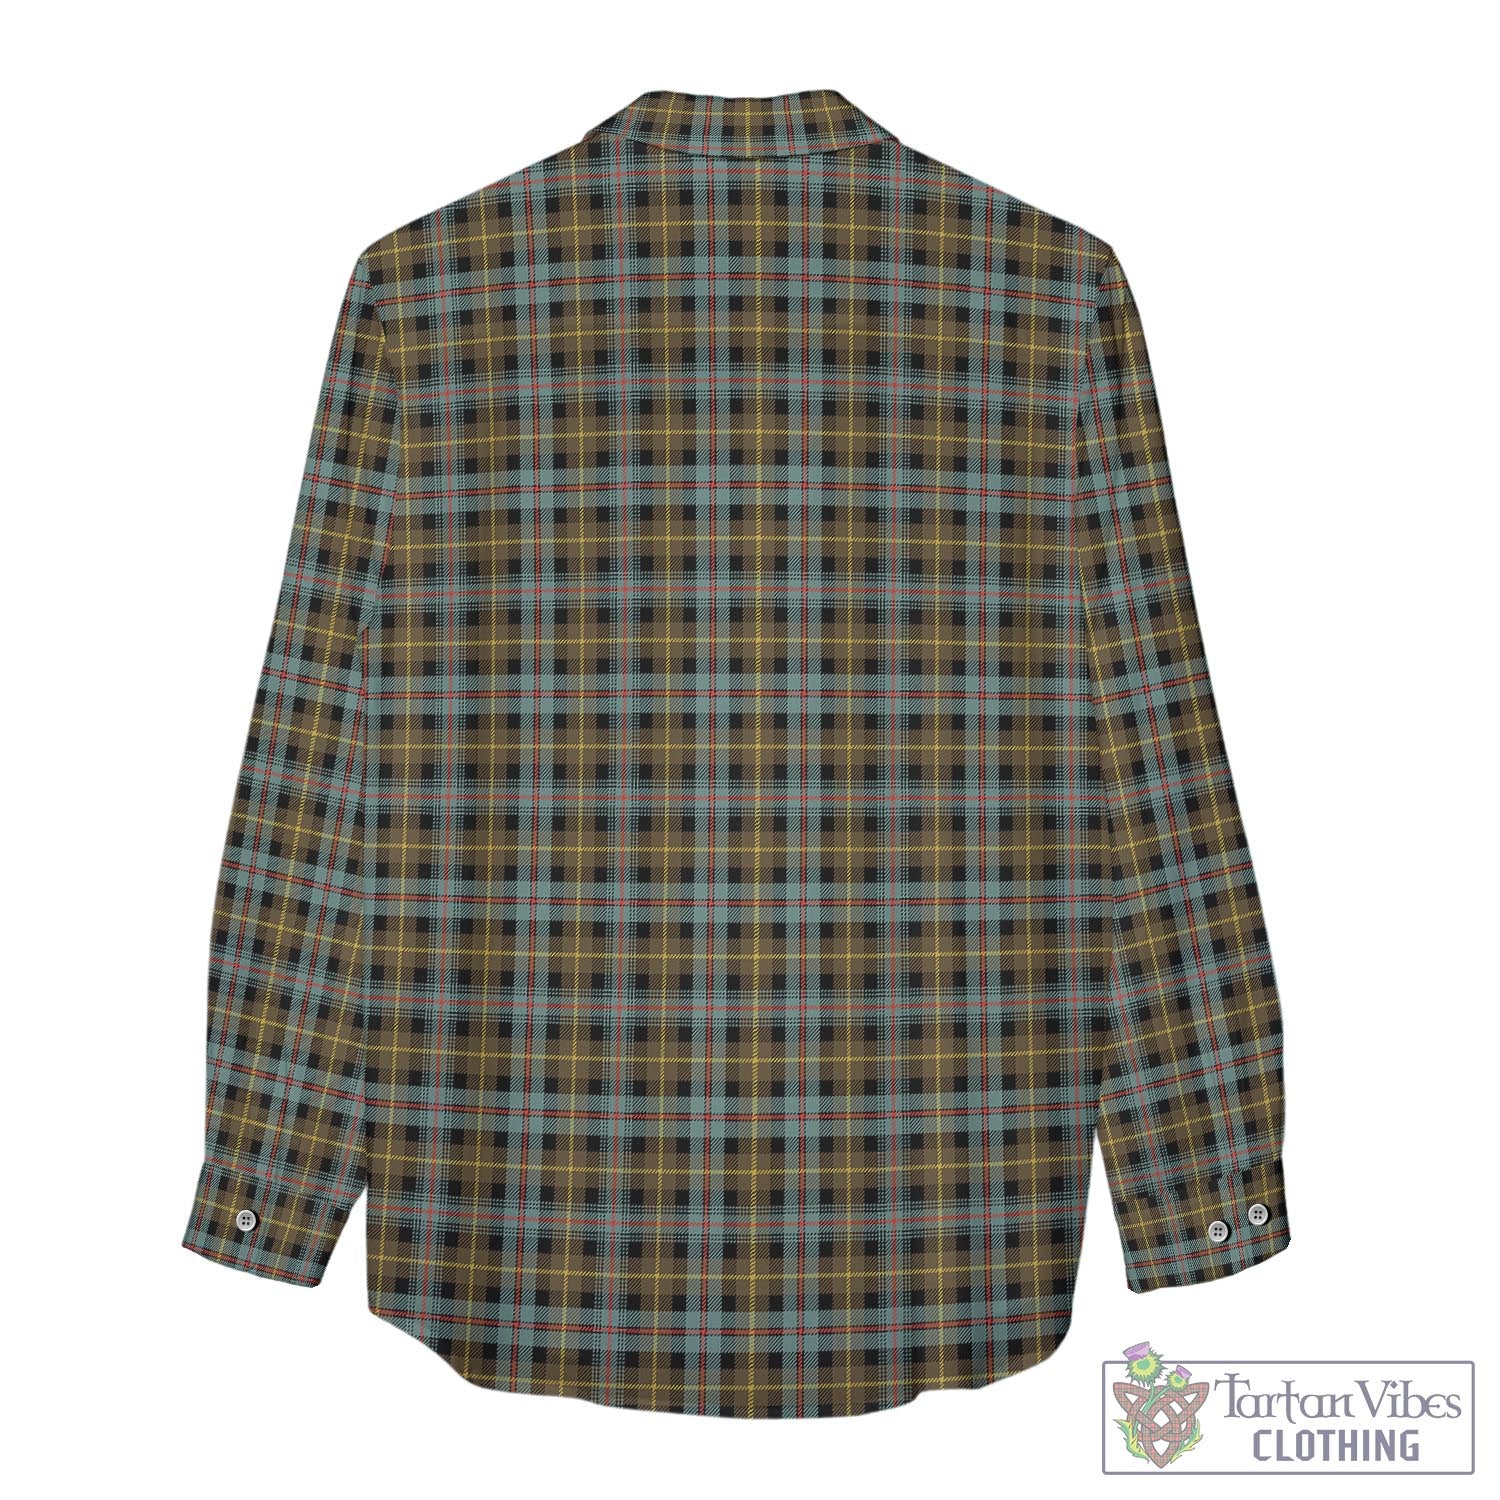 Tartan Vibes Clothing Farquharson Weathered Tartan Womens Casual Shirt with Family Crest